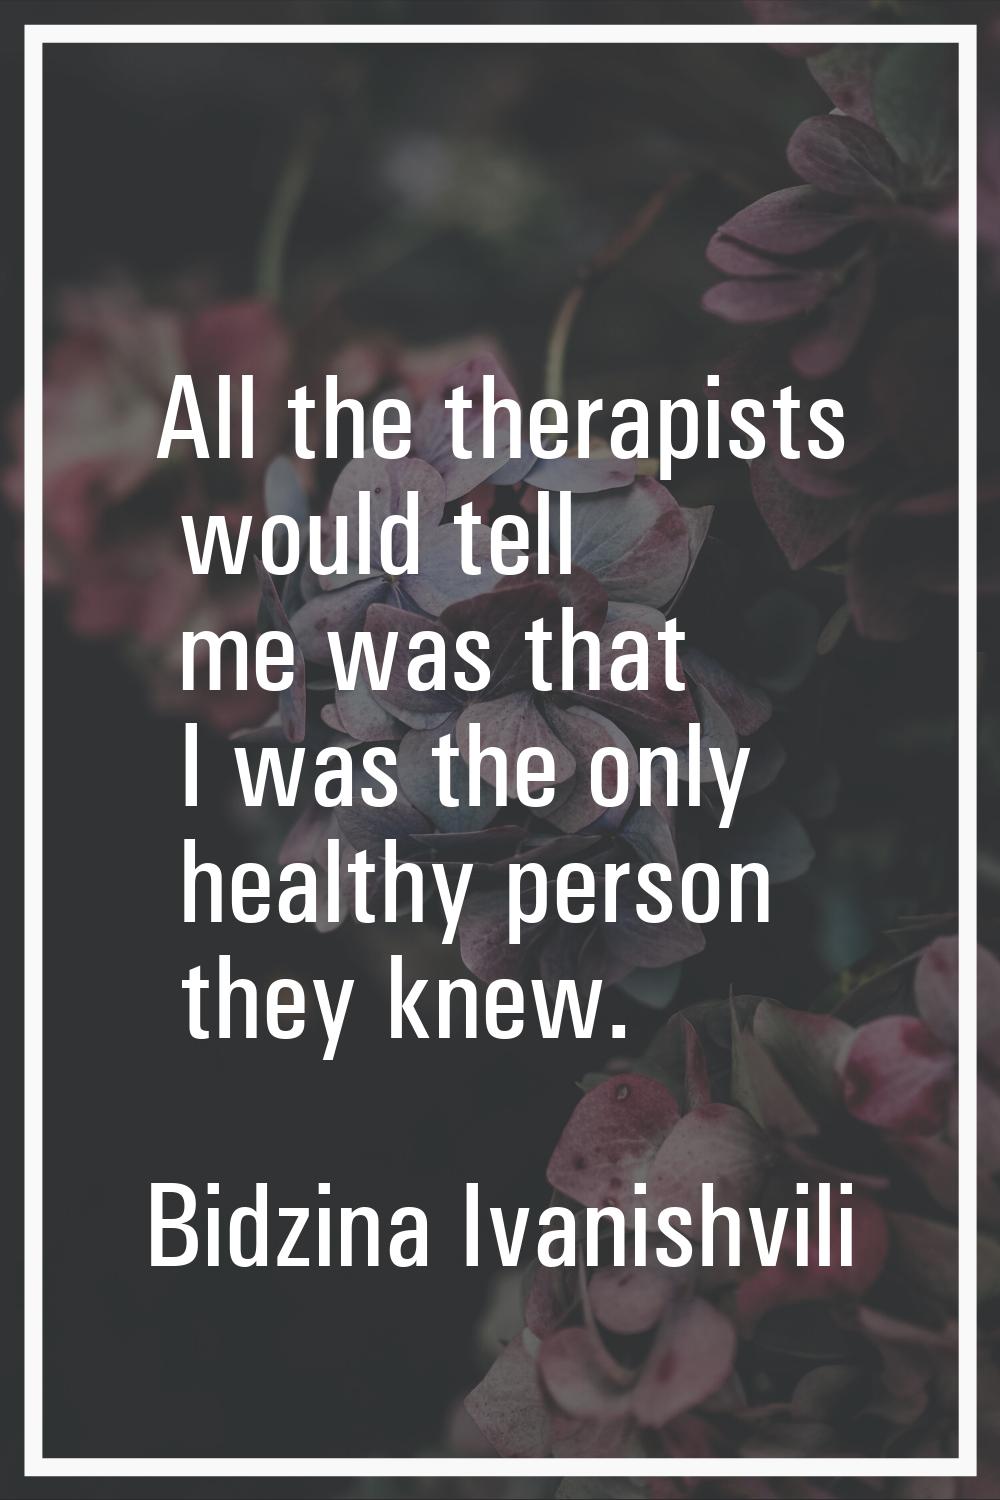 All the therapists would tell me was that I was the only healthy person they knew.